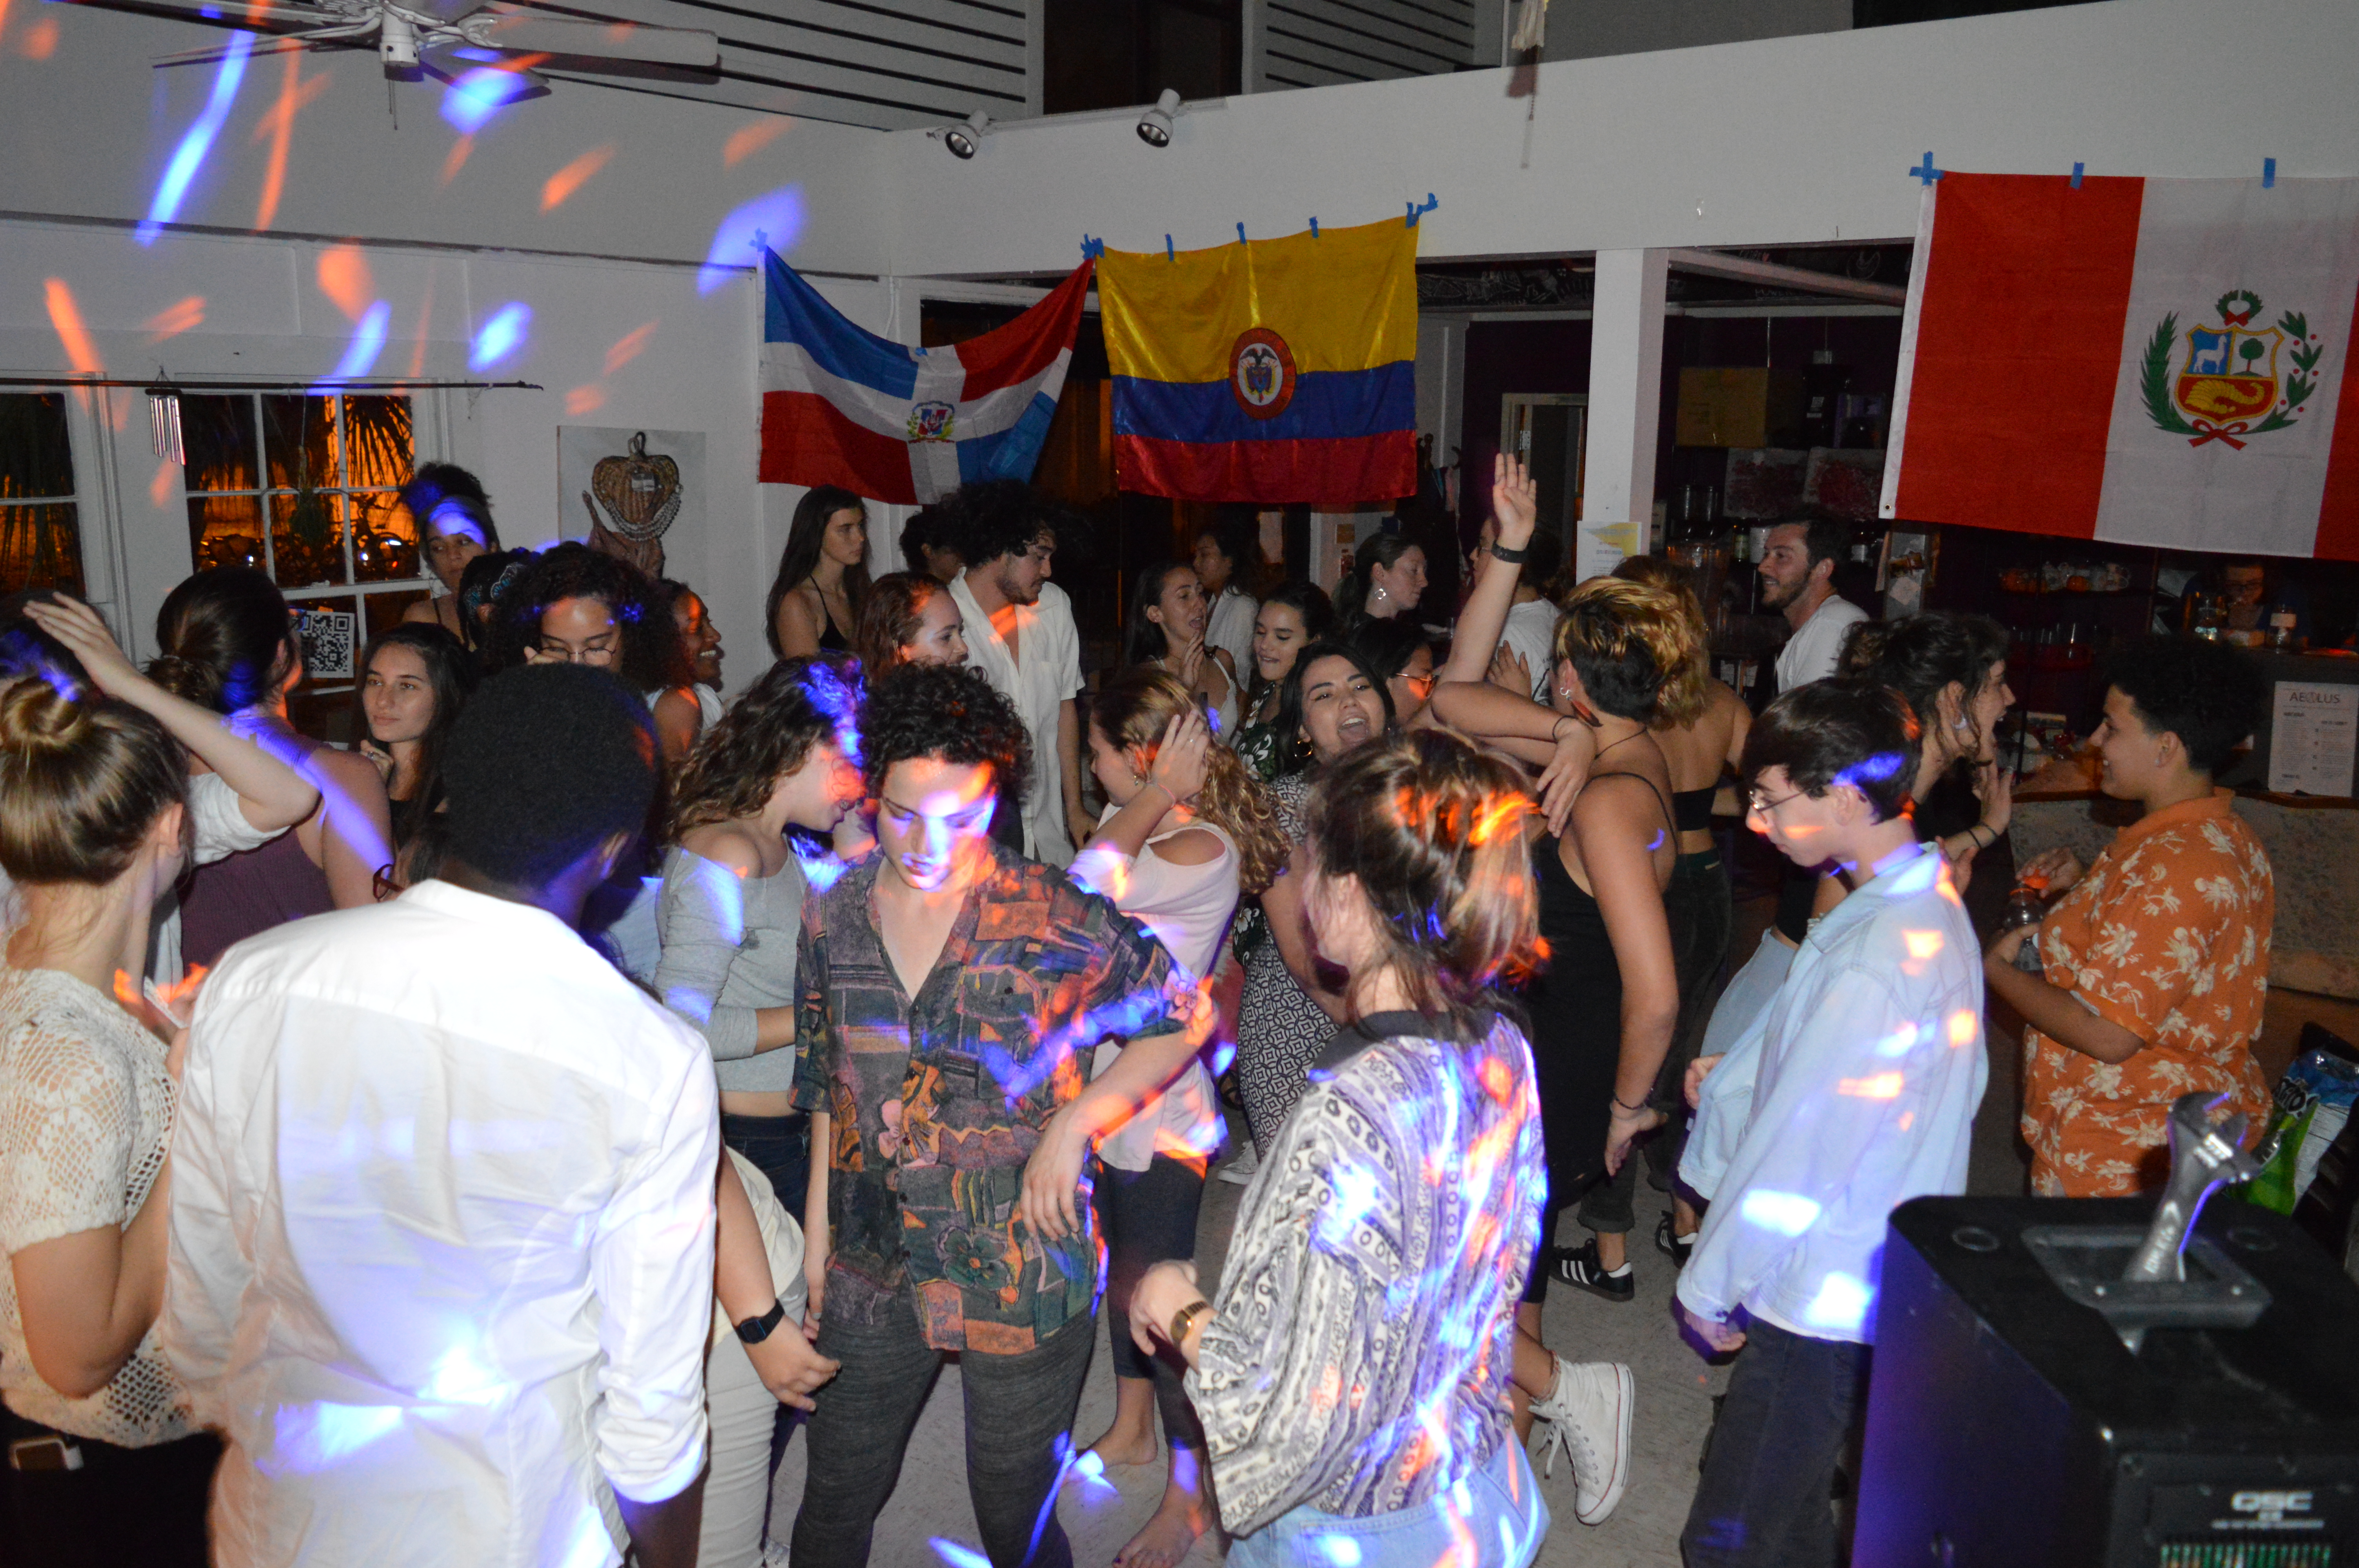 Salsa^2  : Celebrating Latinx culture while at a  predominantly white campus